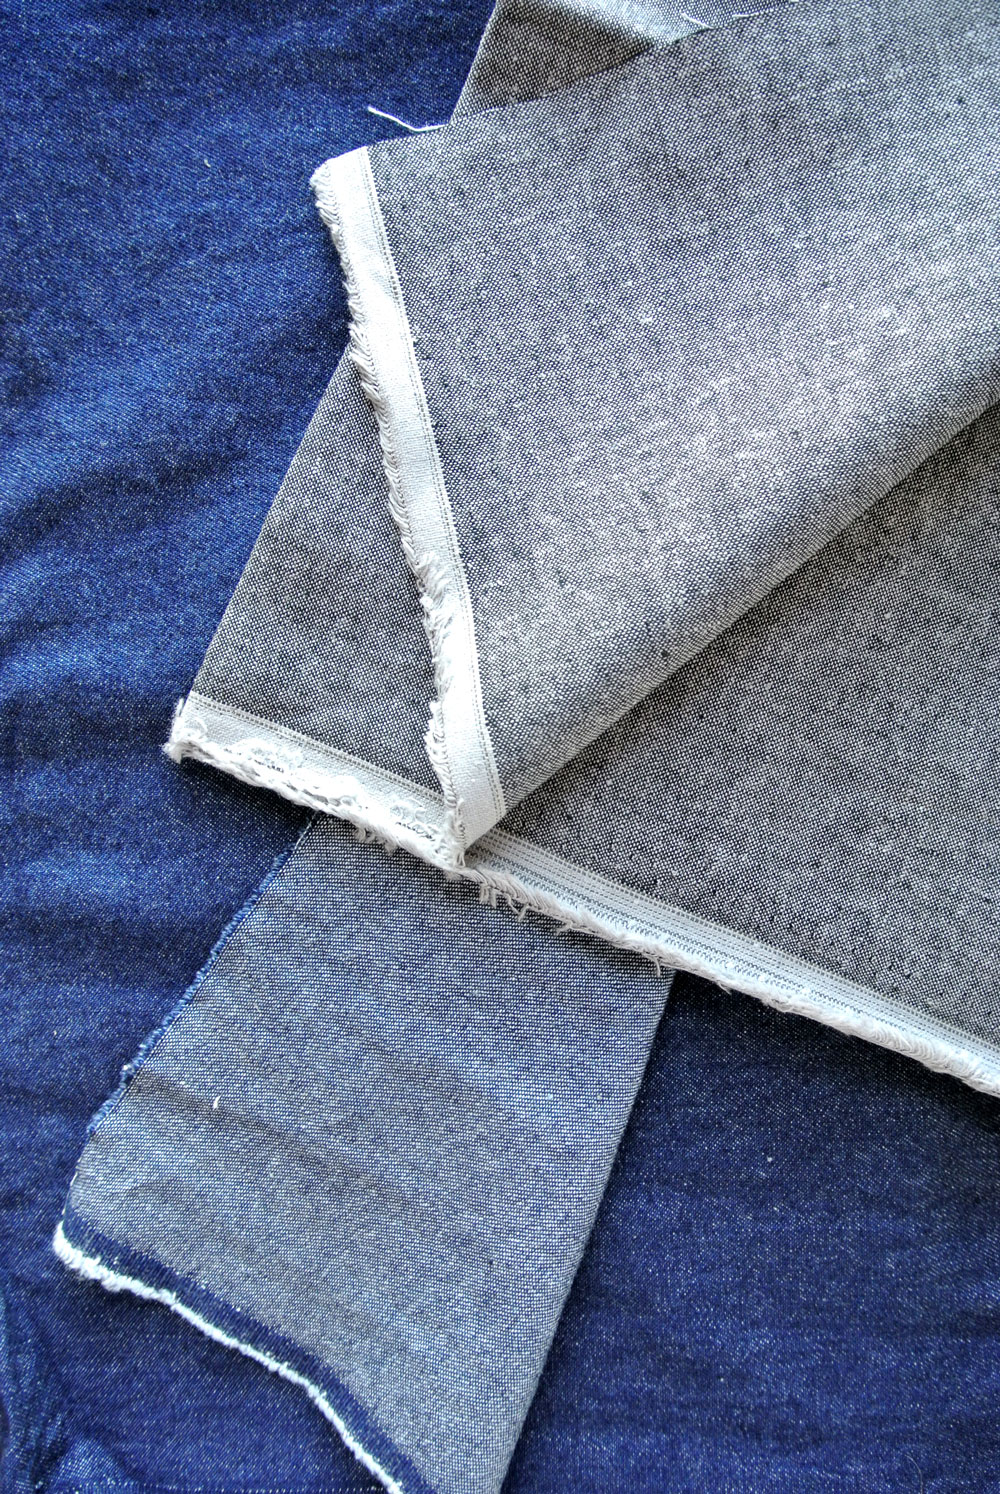 https://suzyquilts.com/whats-the-difference-between-chambray-and-denim/